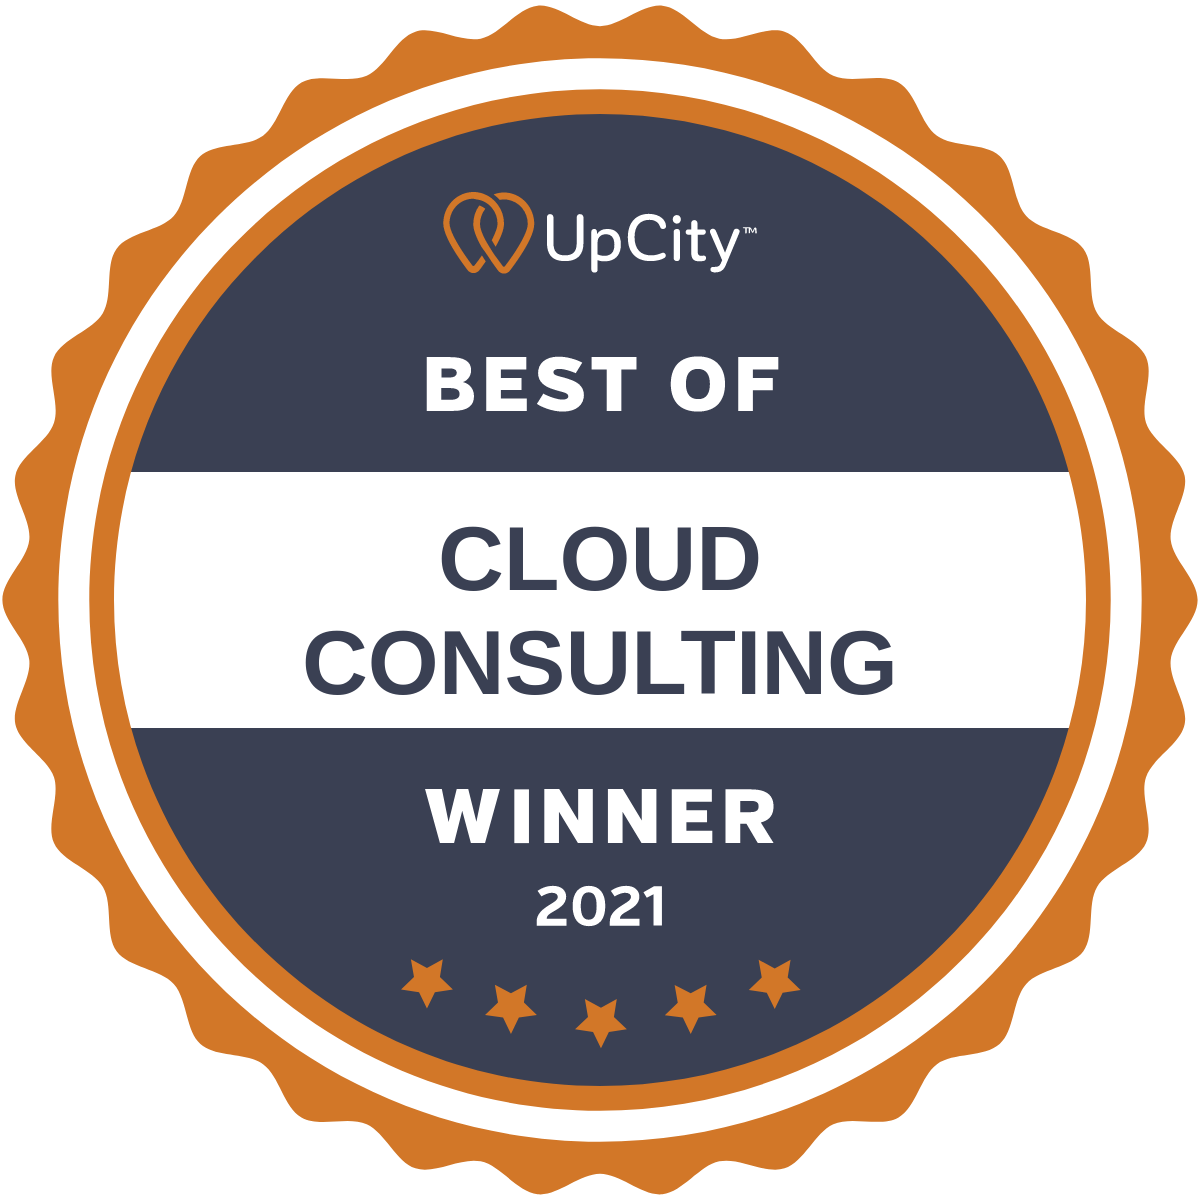 CloudMasonry 2021 Best of Cloud Consulting Award Winner by UpCity!